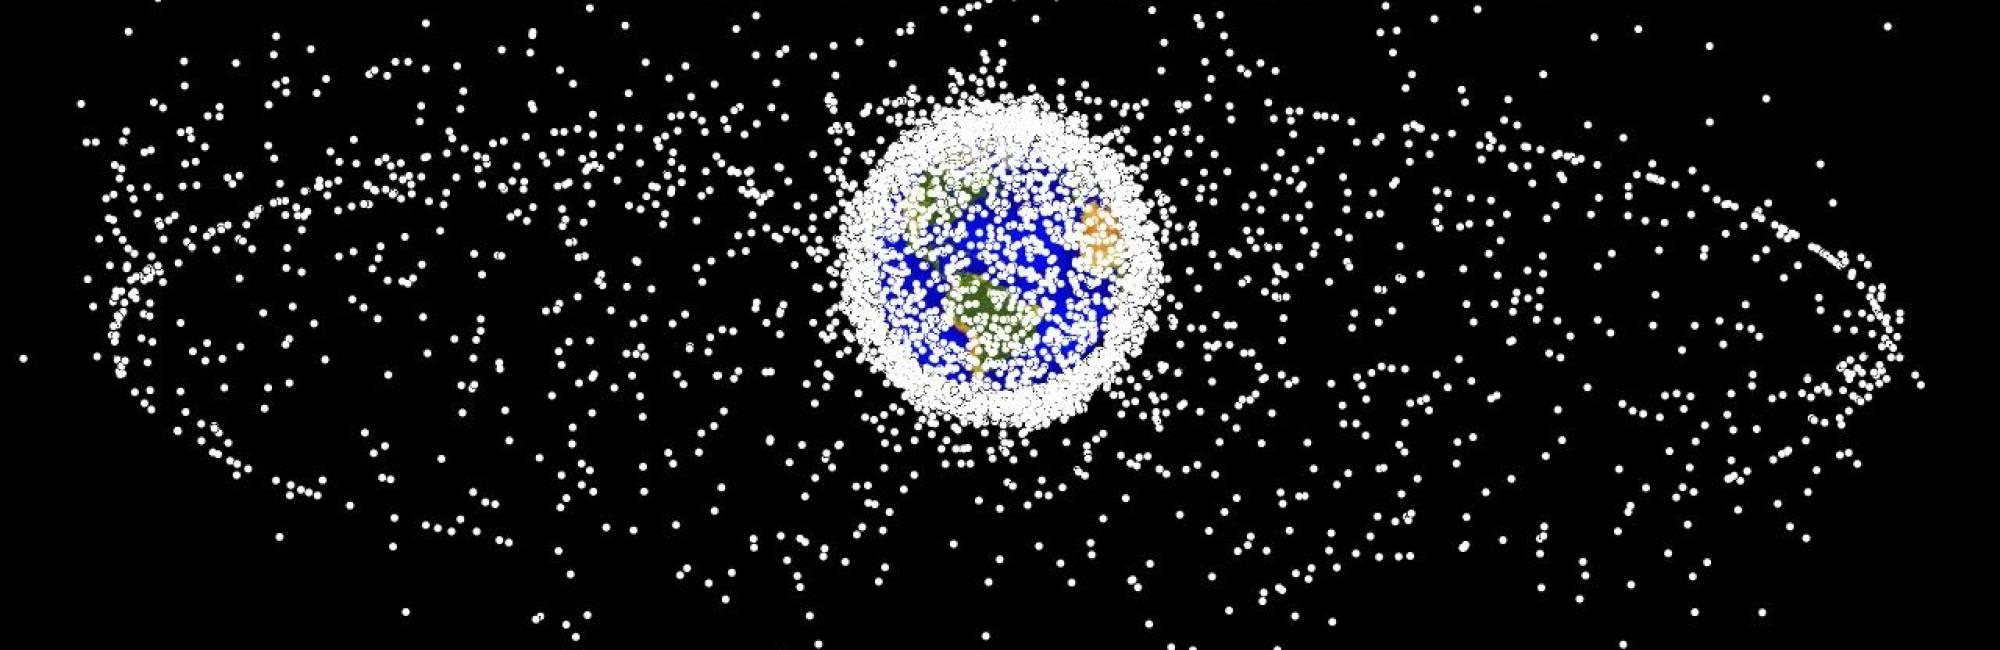 A computer-generated image representing space debris as could be seen from high Earth orbit.